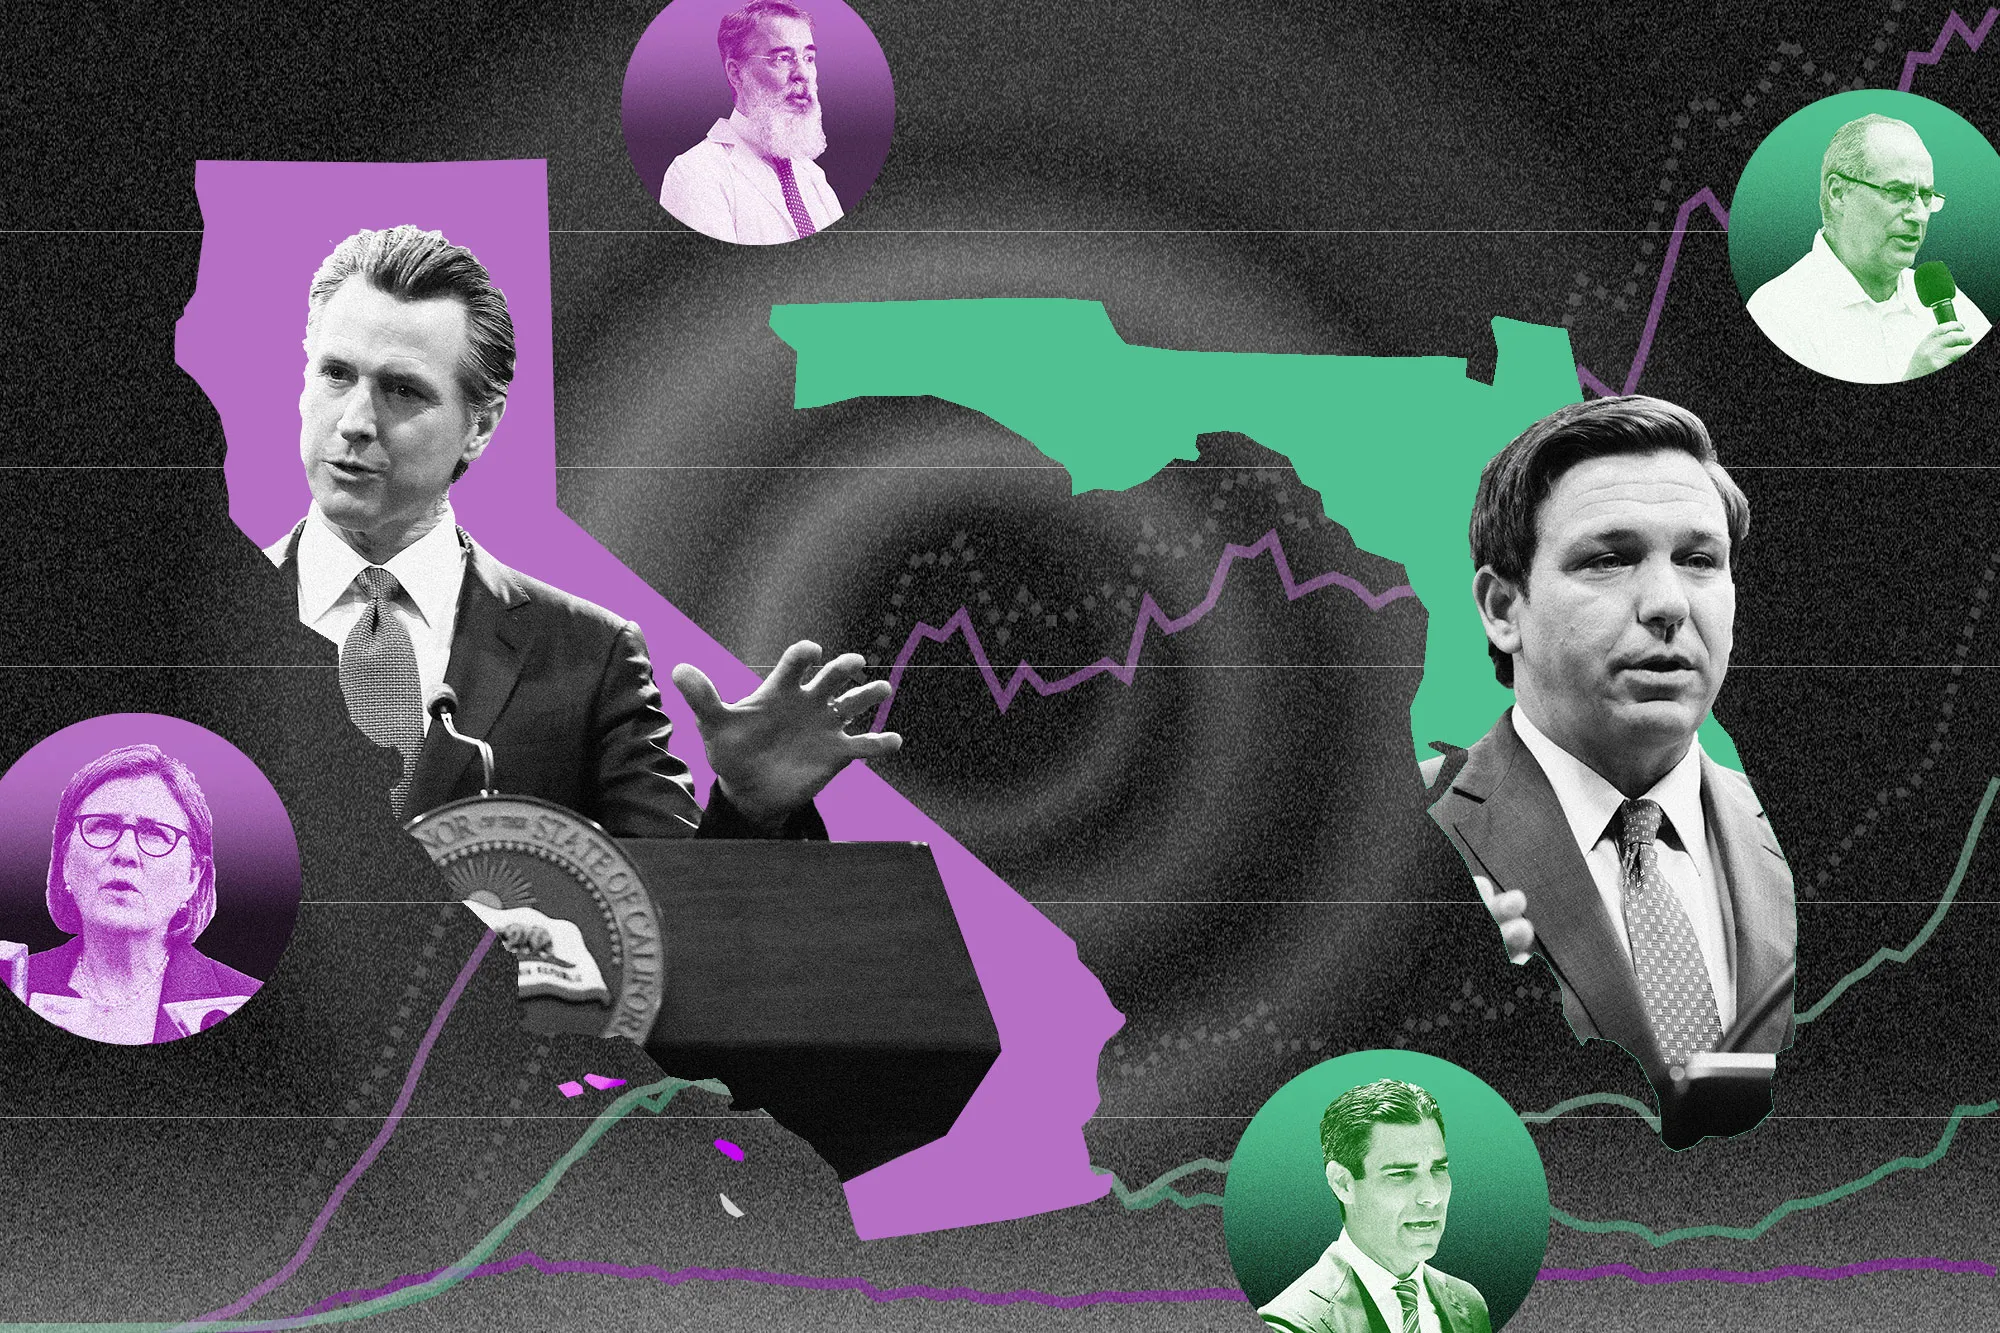 Photo illustration depicting the shapes of California and Florida as background to portraits of their respective 2020 governors, Gavin Newsom and Ron DeSantis.